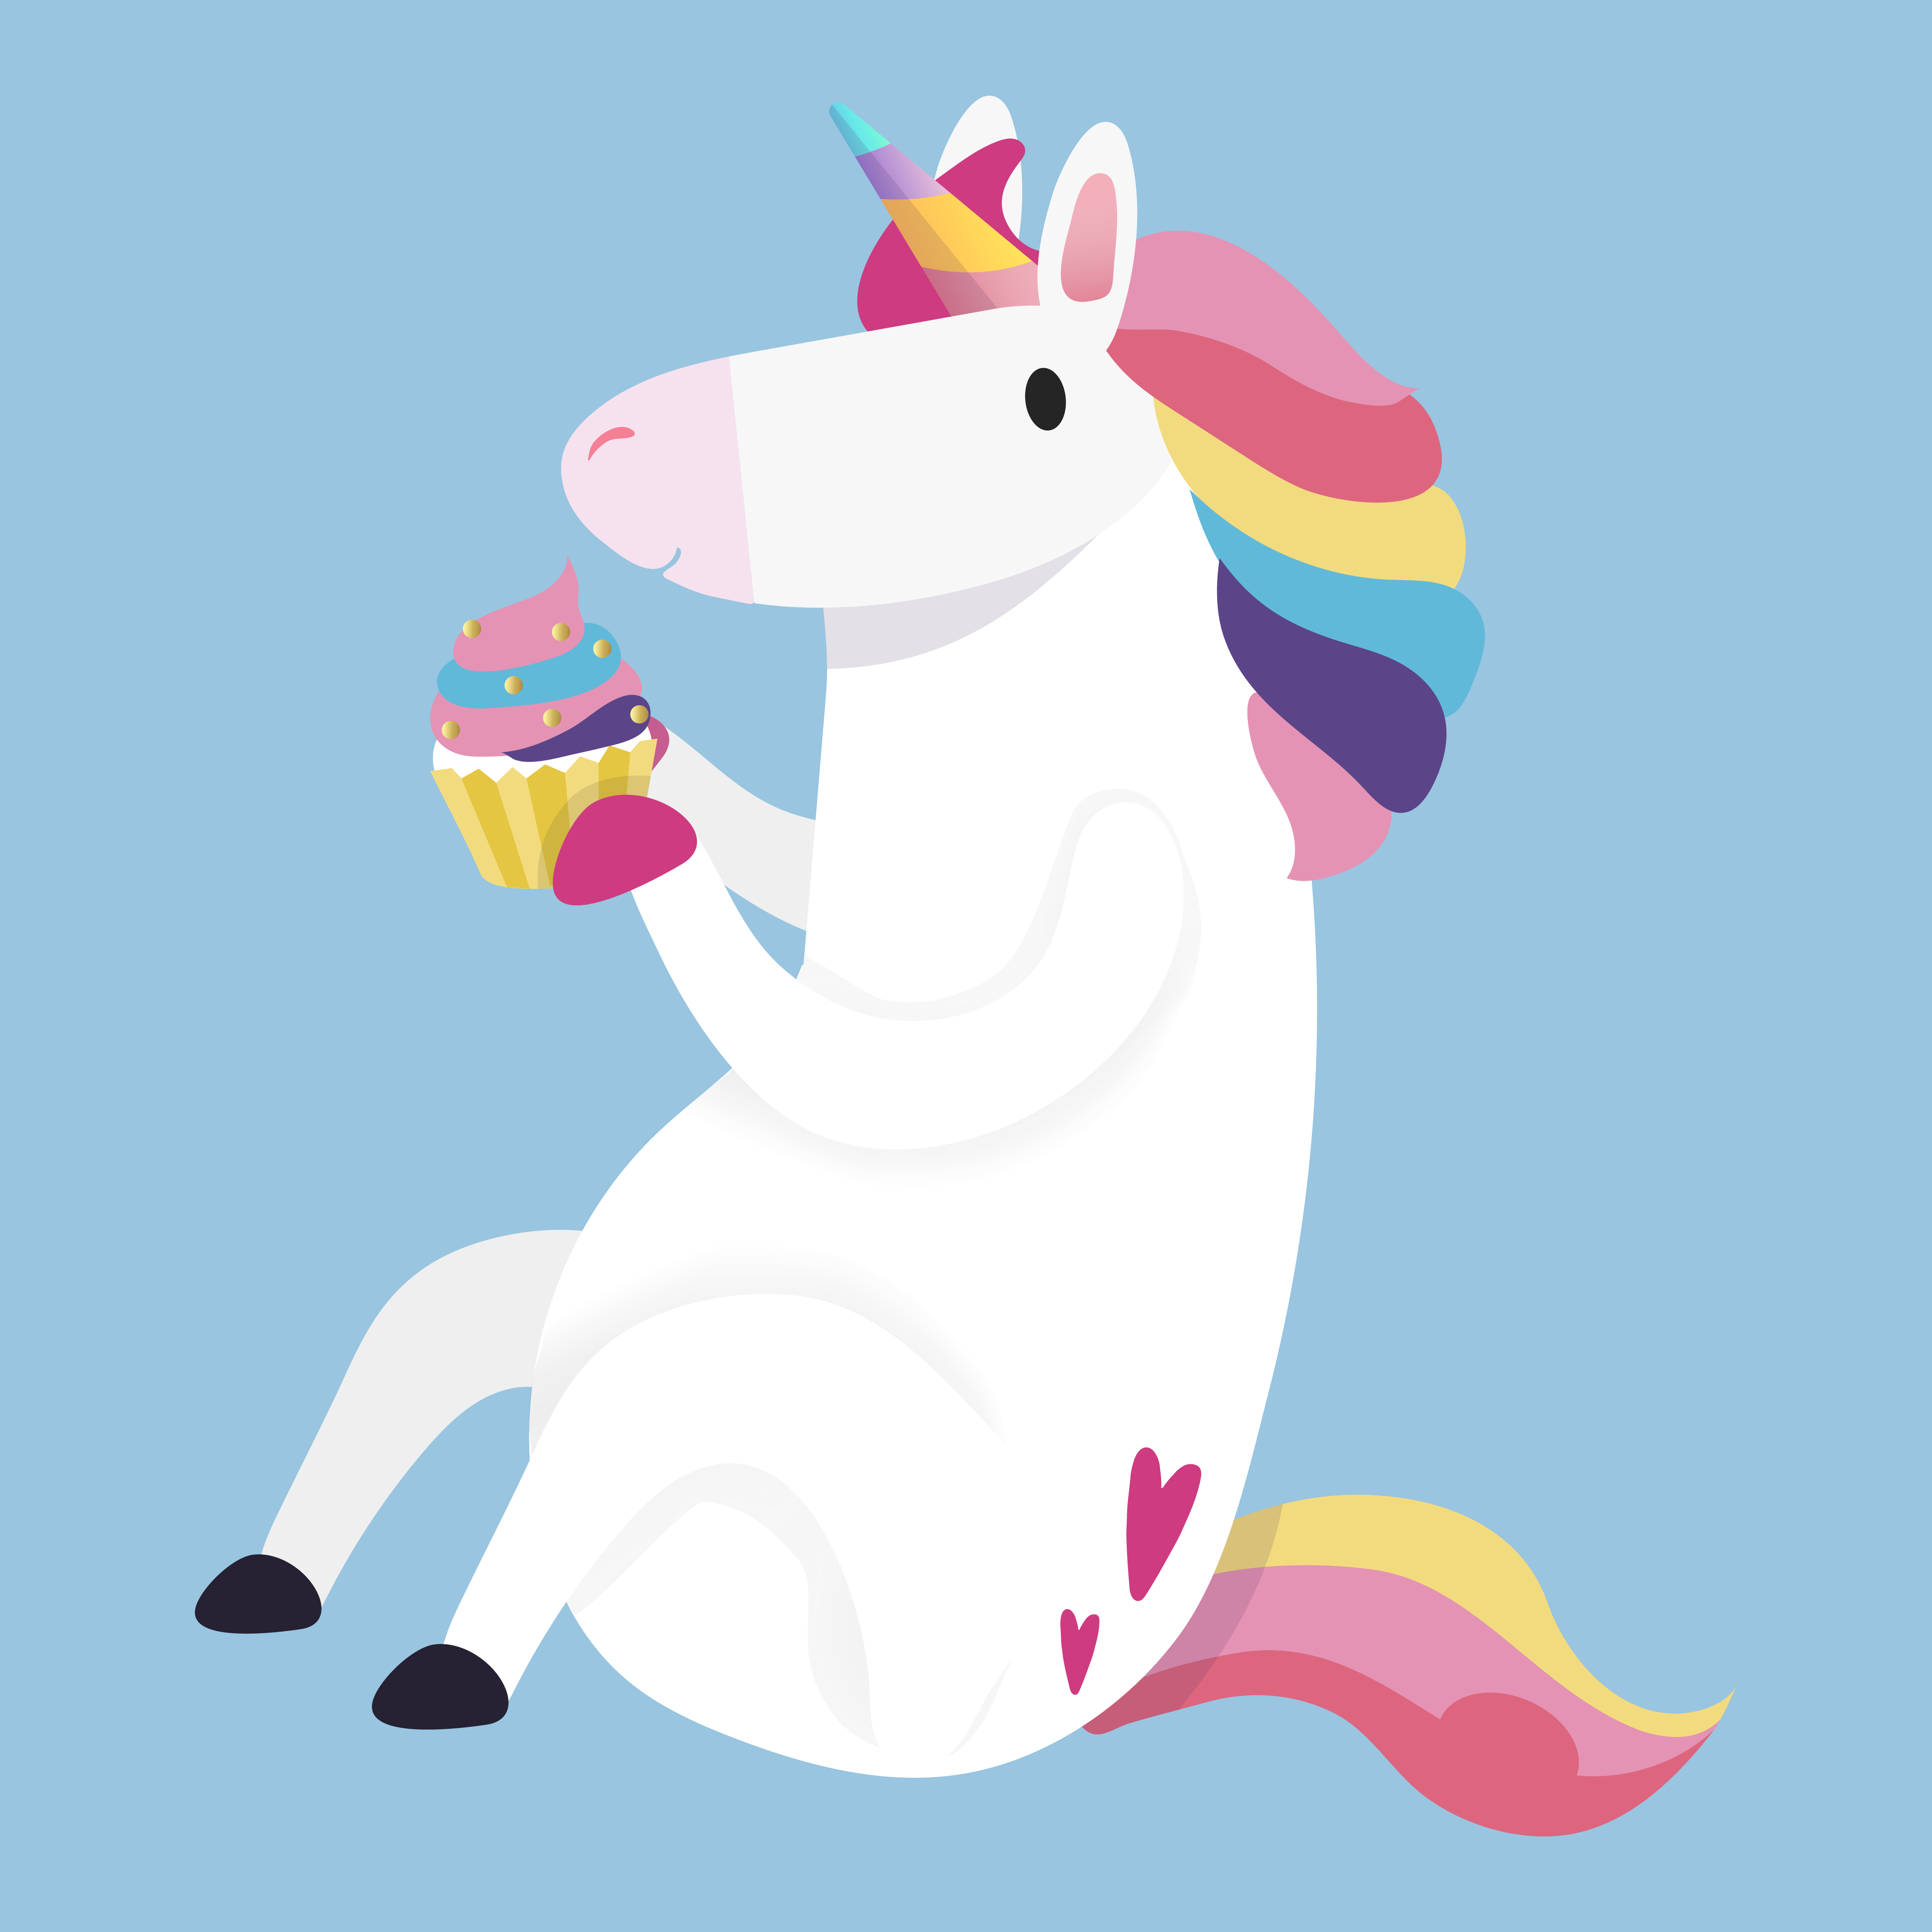 Illustration of a unicorn holding a cupcake on a blue background.